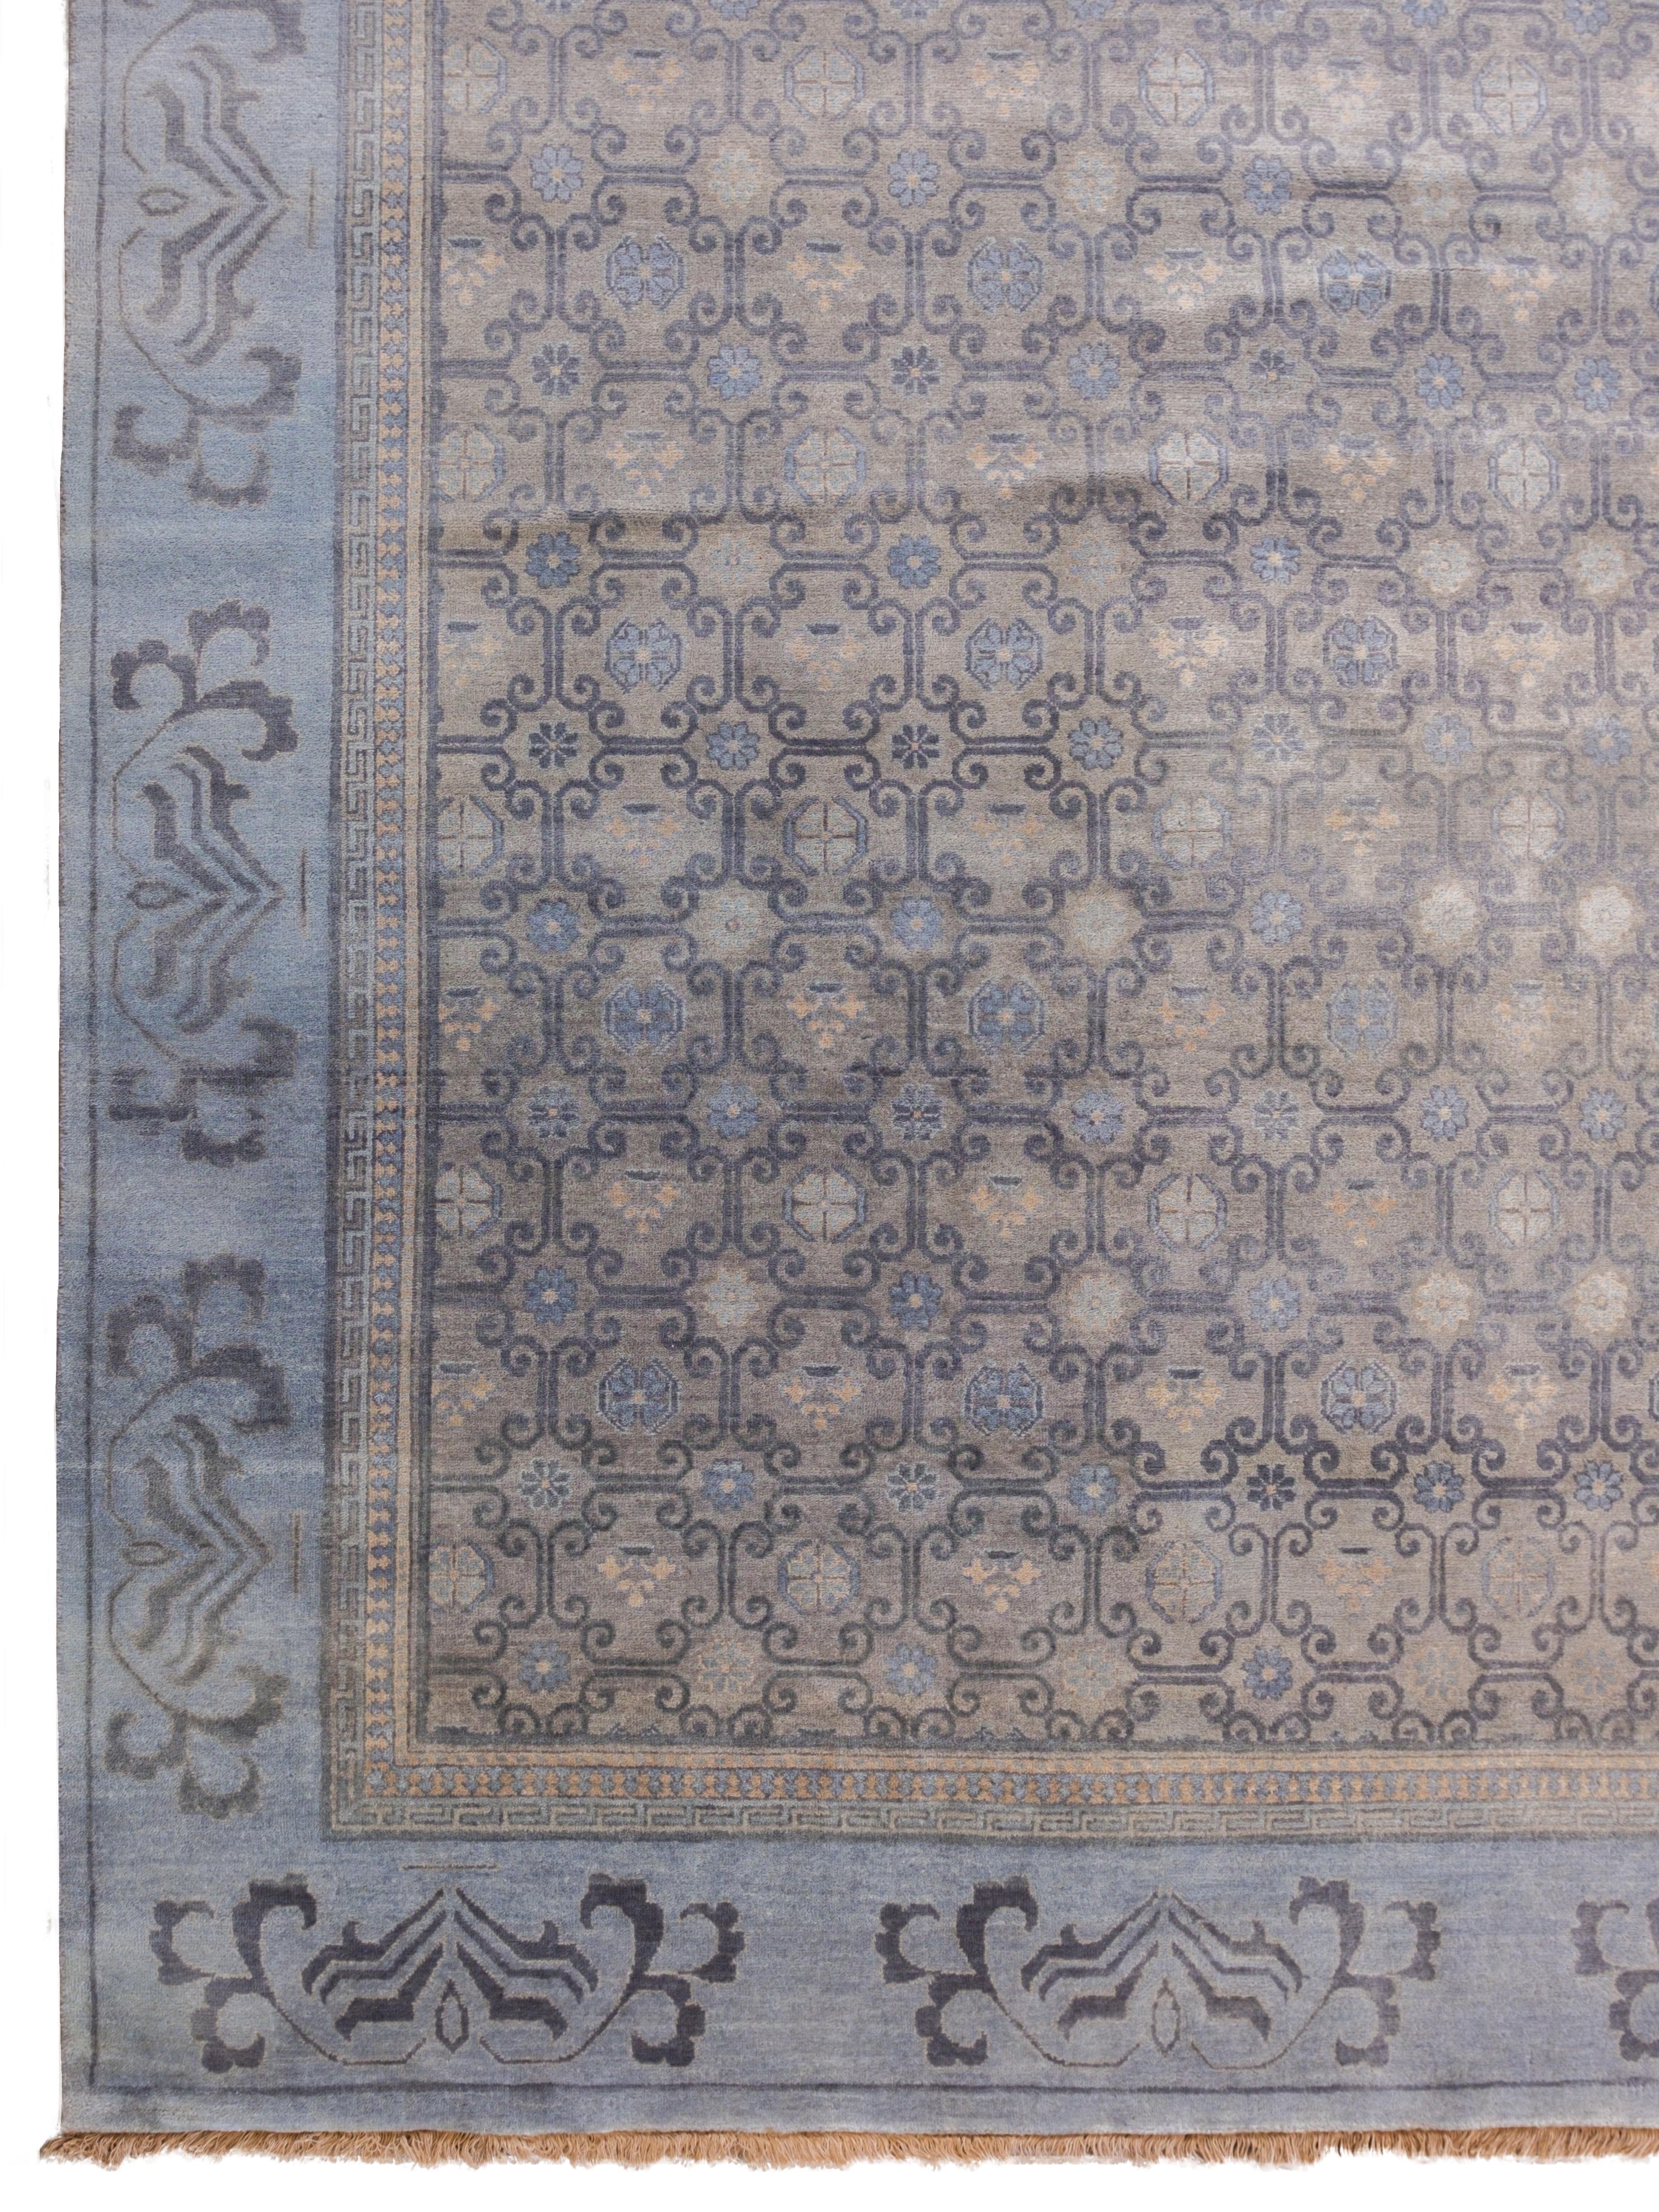 Hand-knotted in versatile shades of gray, taupe, cream, and steel blue wool, this transitional Persian Khotan carpet measures 9' x 12' and belongs to the Orley Shabahang World Market Collection. Like all traditional Persian Khotan carpets, this